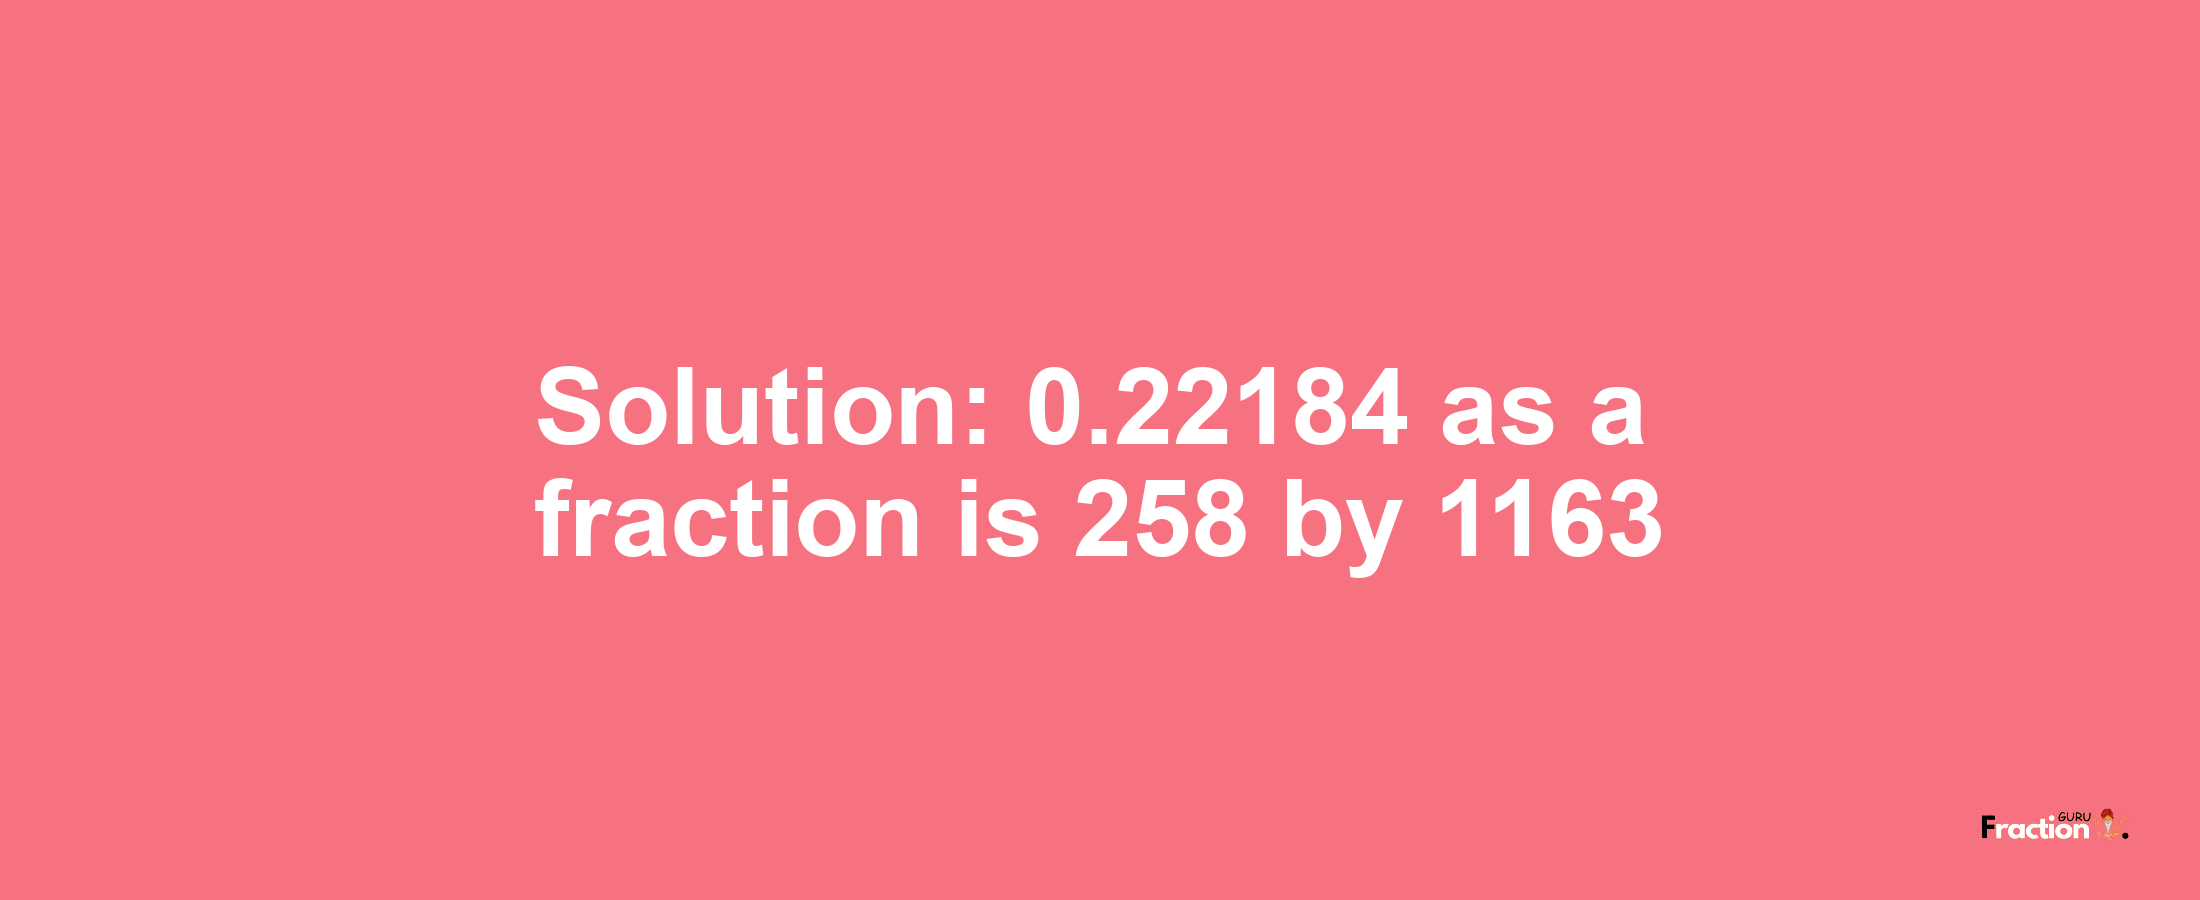 Solution:0.22184 as a fraction is 258/1163